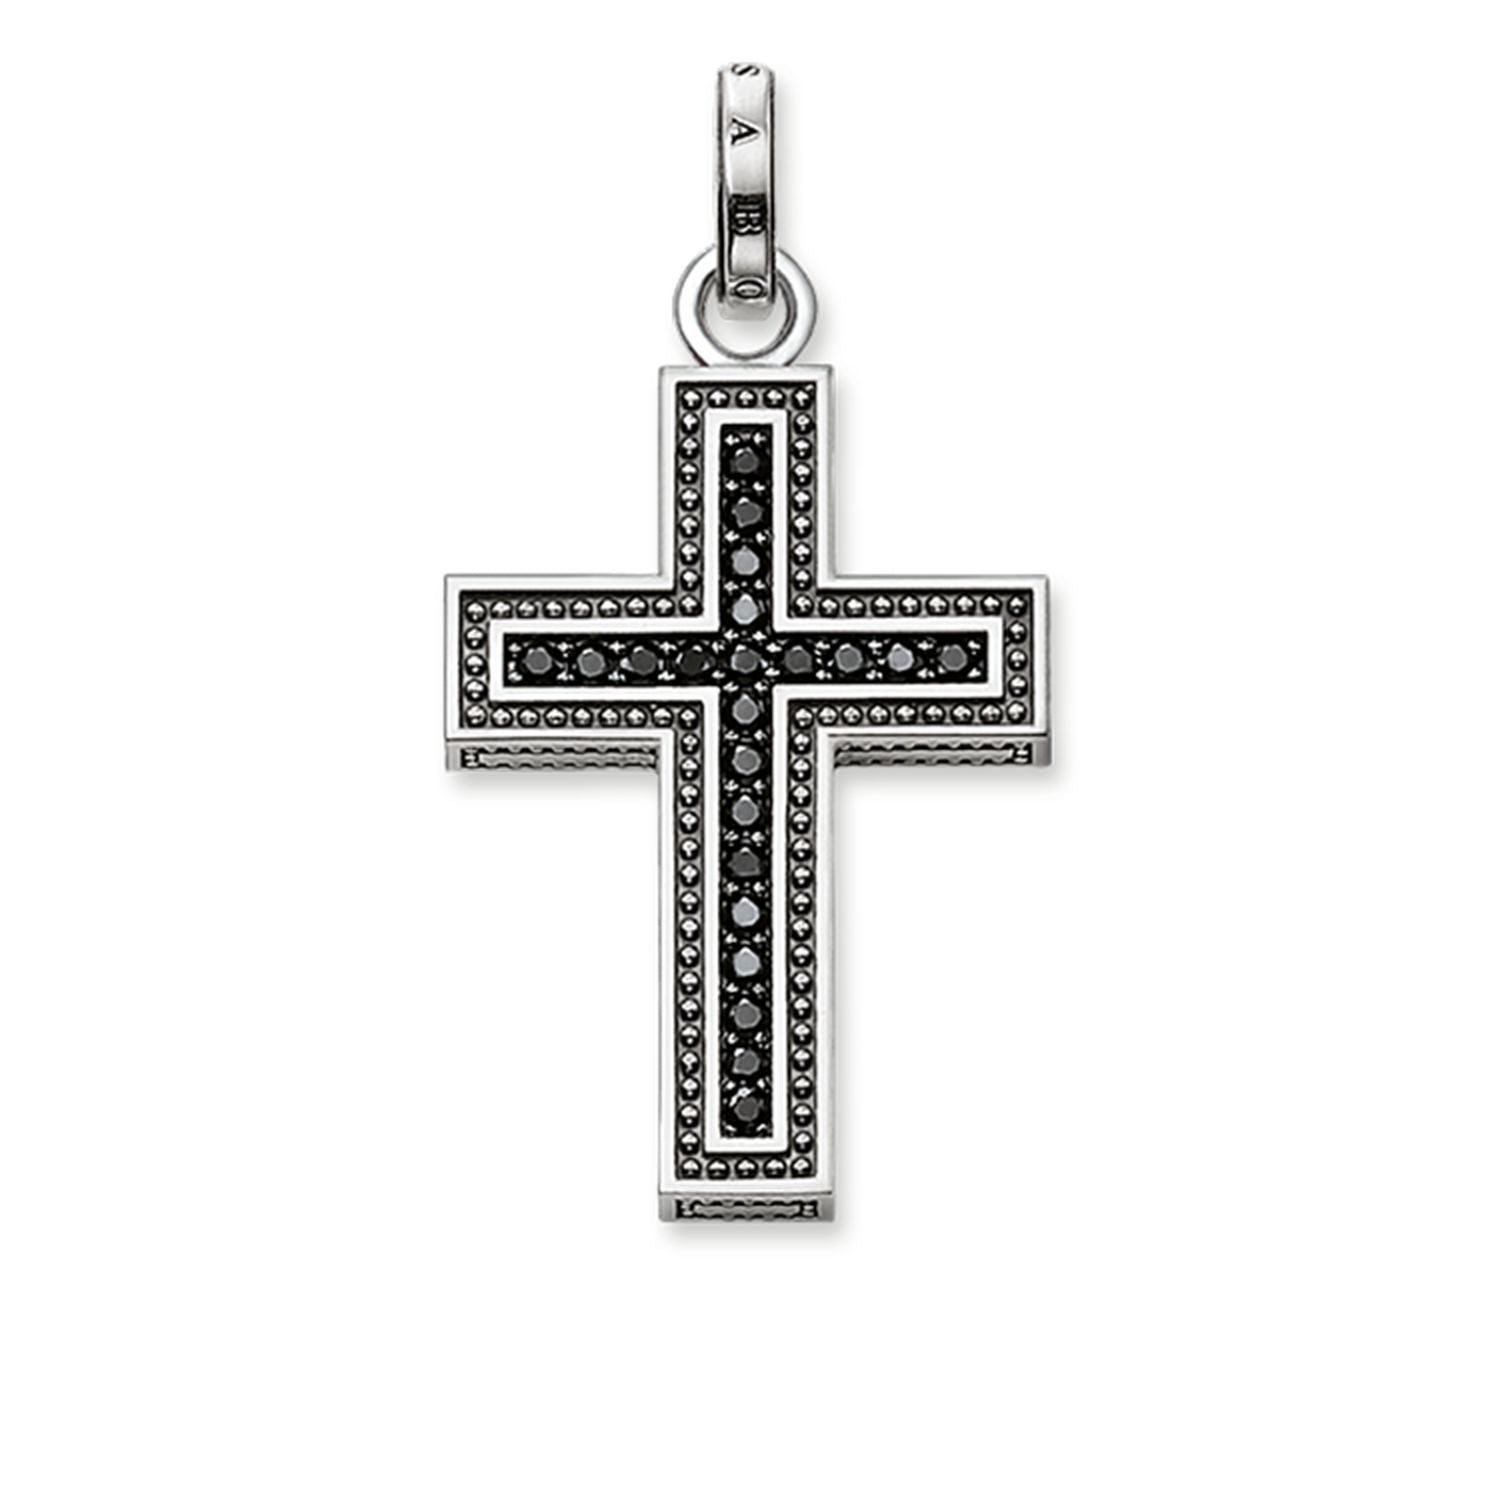 THOMAS SABO REBEL At Heart Large Gothic Cross Pendant Carrier & TS Ball  Chain £225.00 - PicClick UK